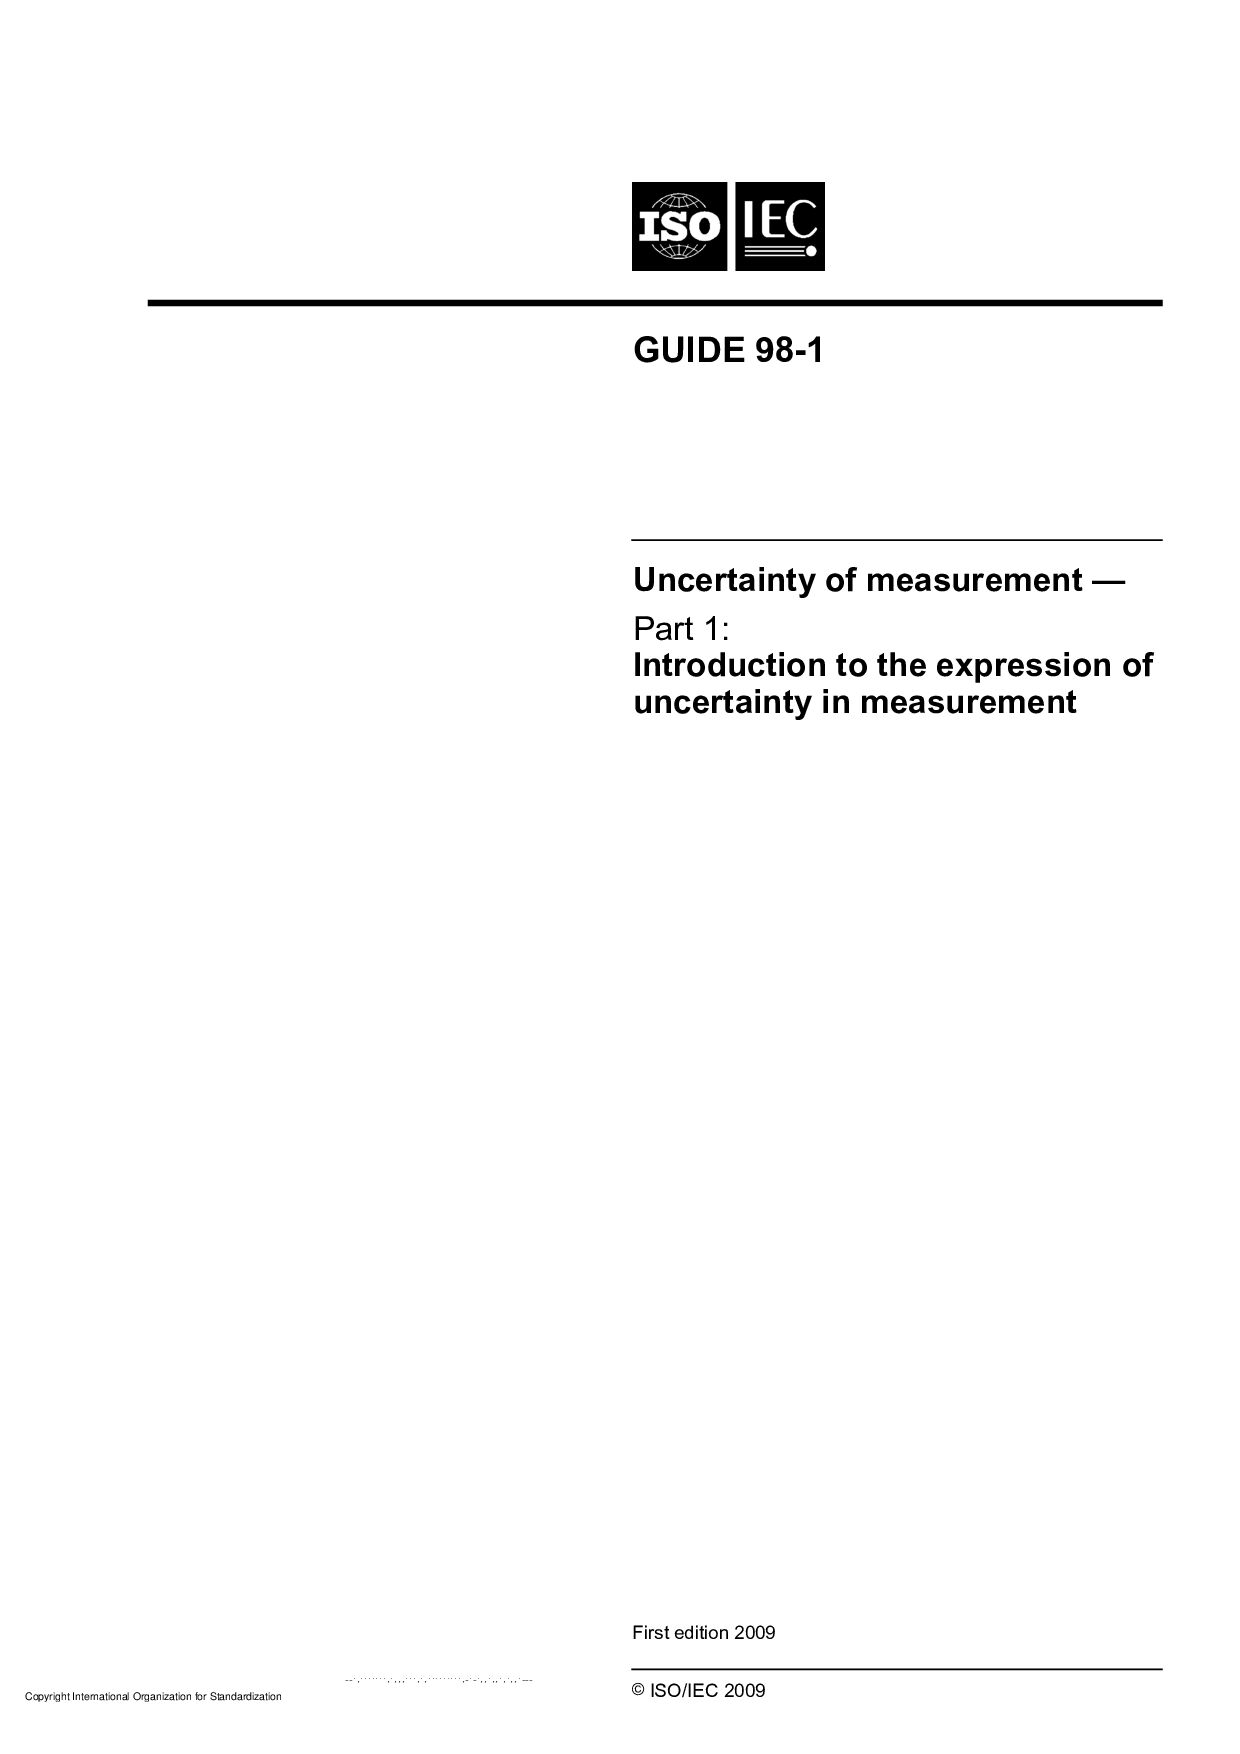 ISO/IEC GUIDE 98-1:2009